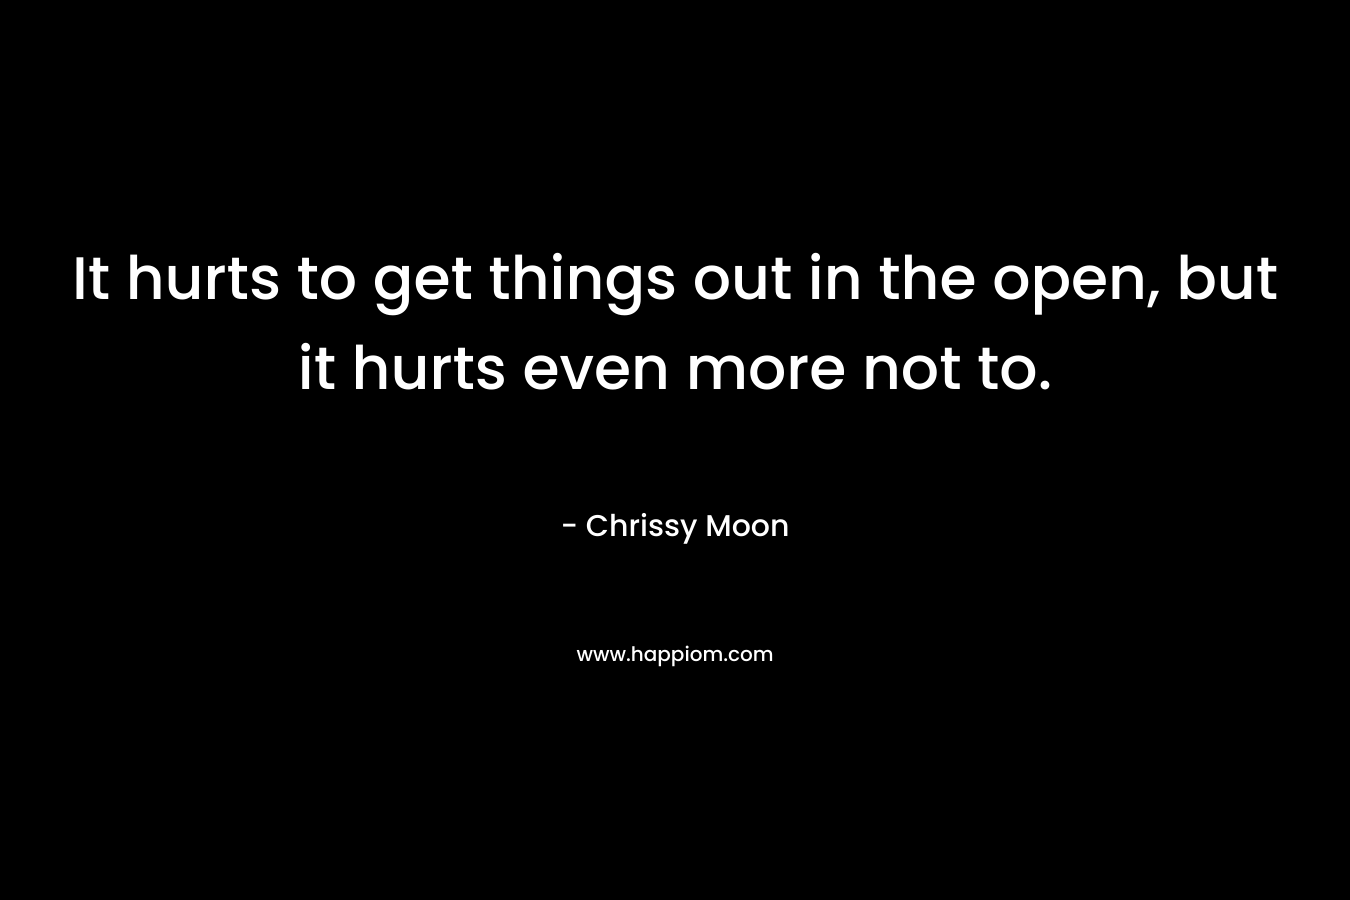 It hurts to get things out in the open, but it hurts even more not to.